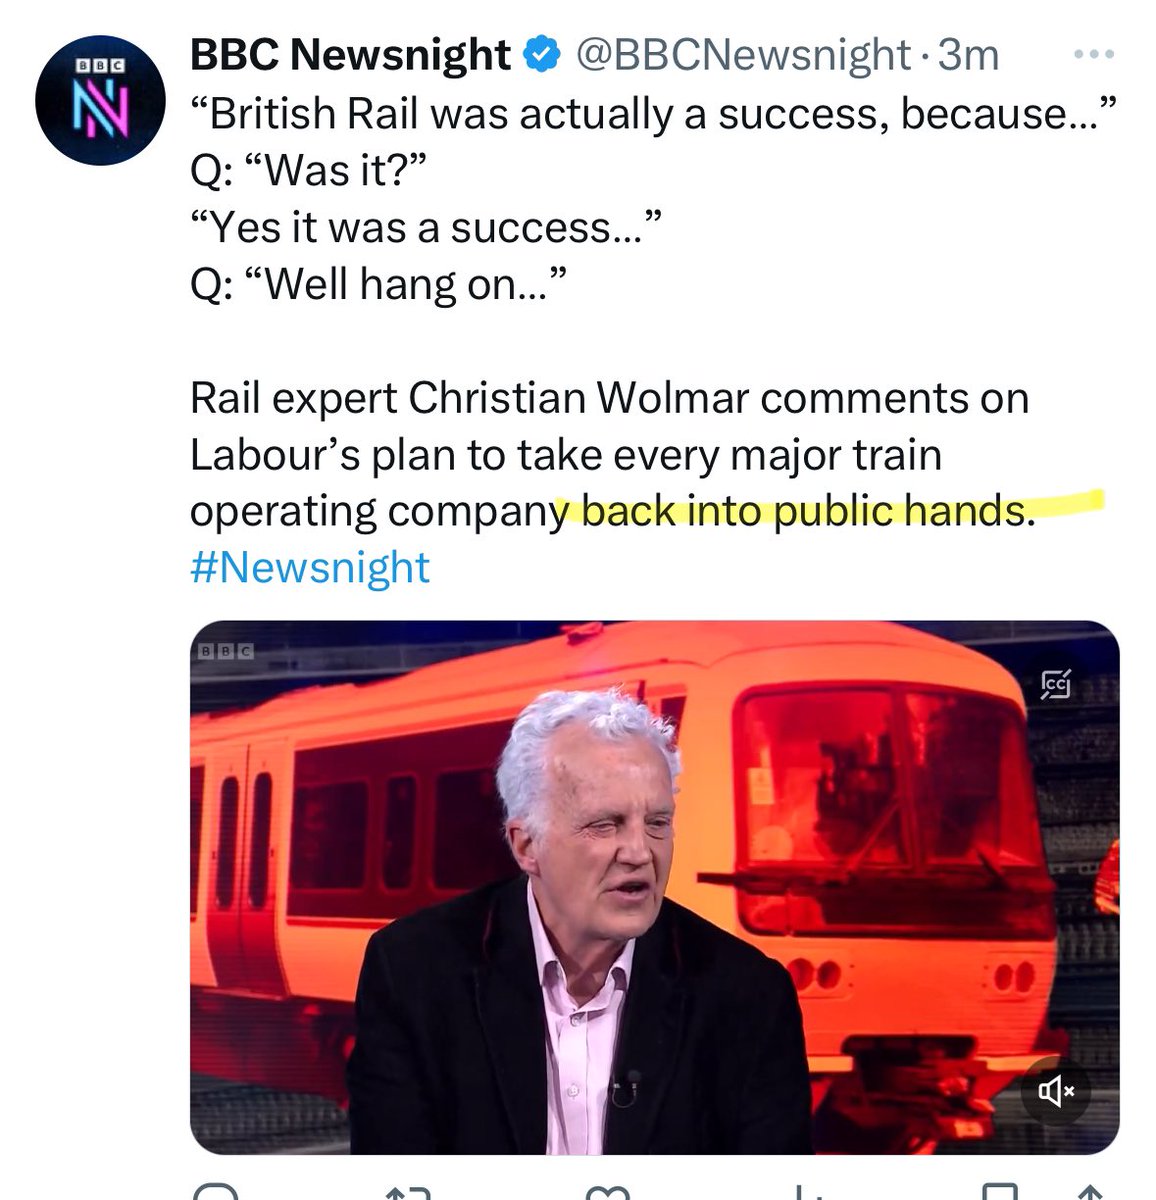 Absolutely sick of this linguistic capitulation from those who should know better. You can have a reasonable debate without taking on the language of the activists as if it were neutral. “Back into public hands” is not a neutral way to describe nationalisation, @BBCNewsnight.